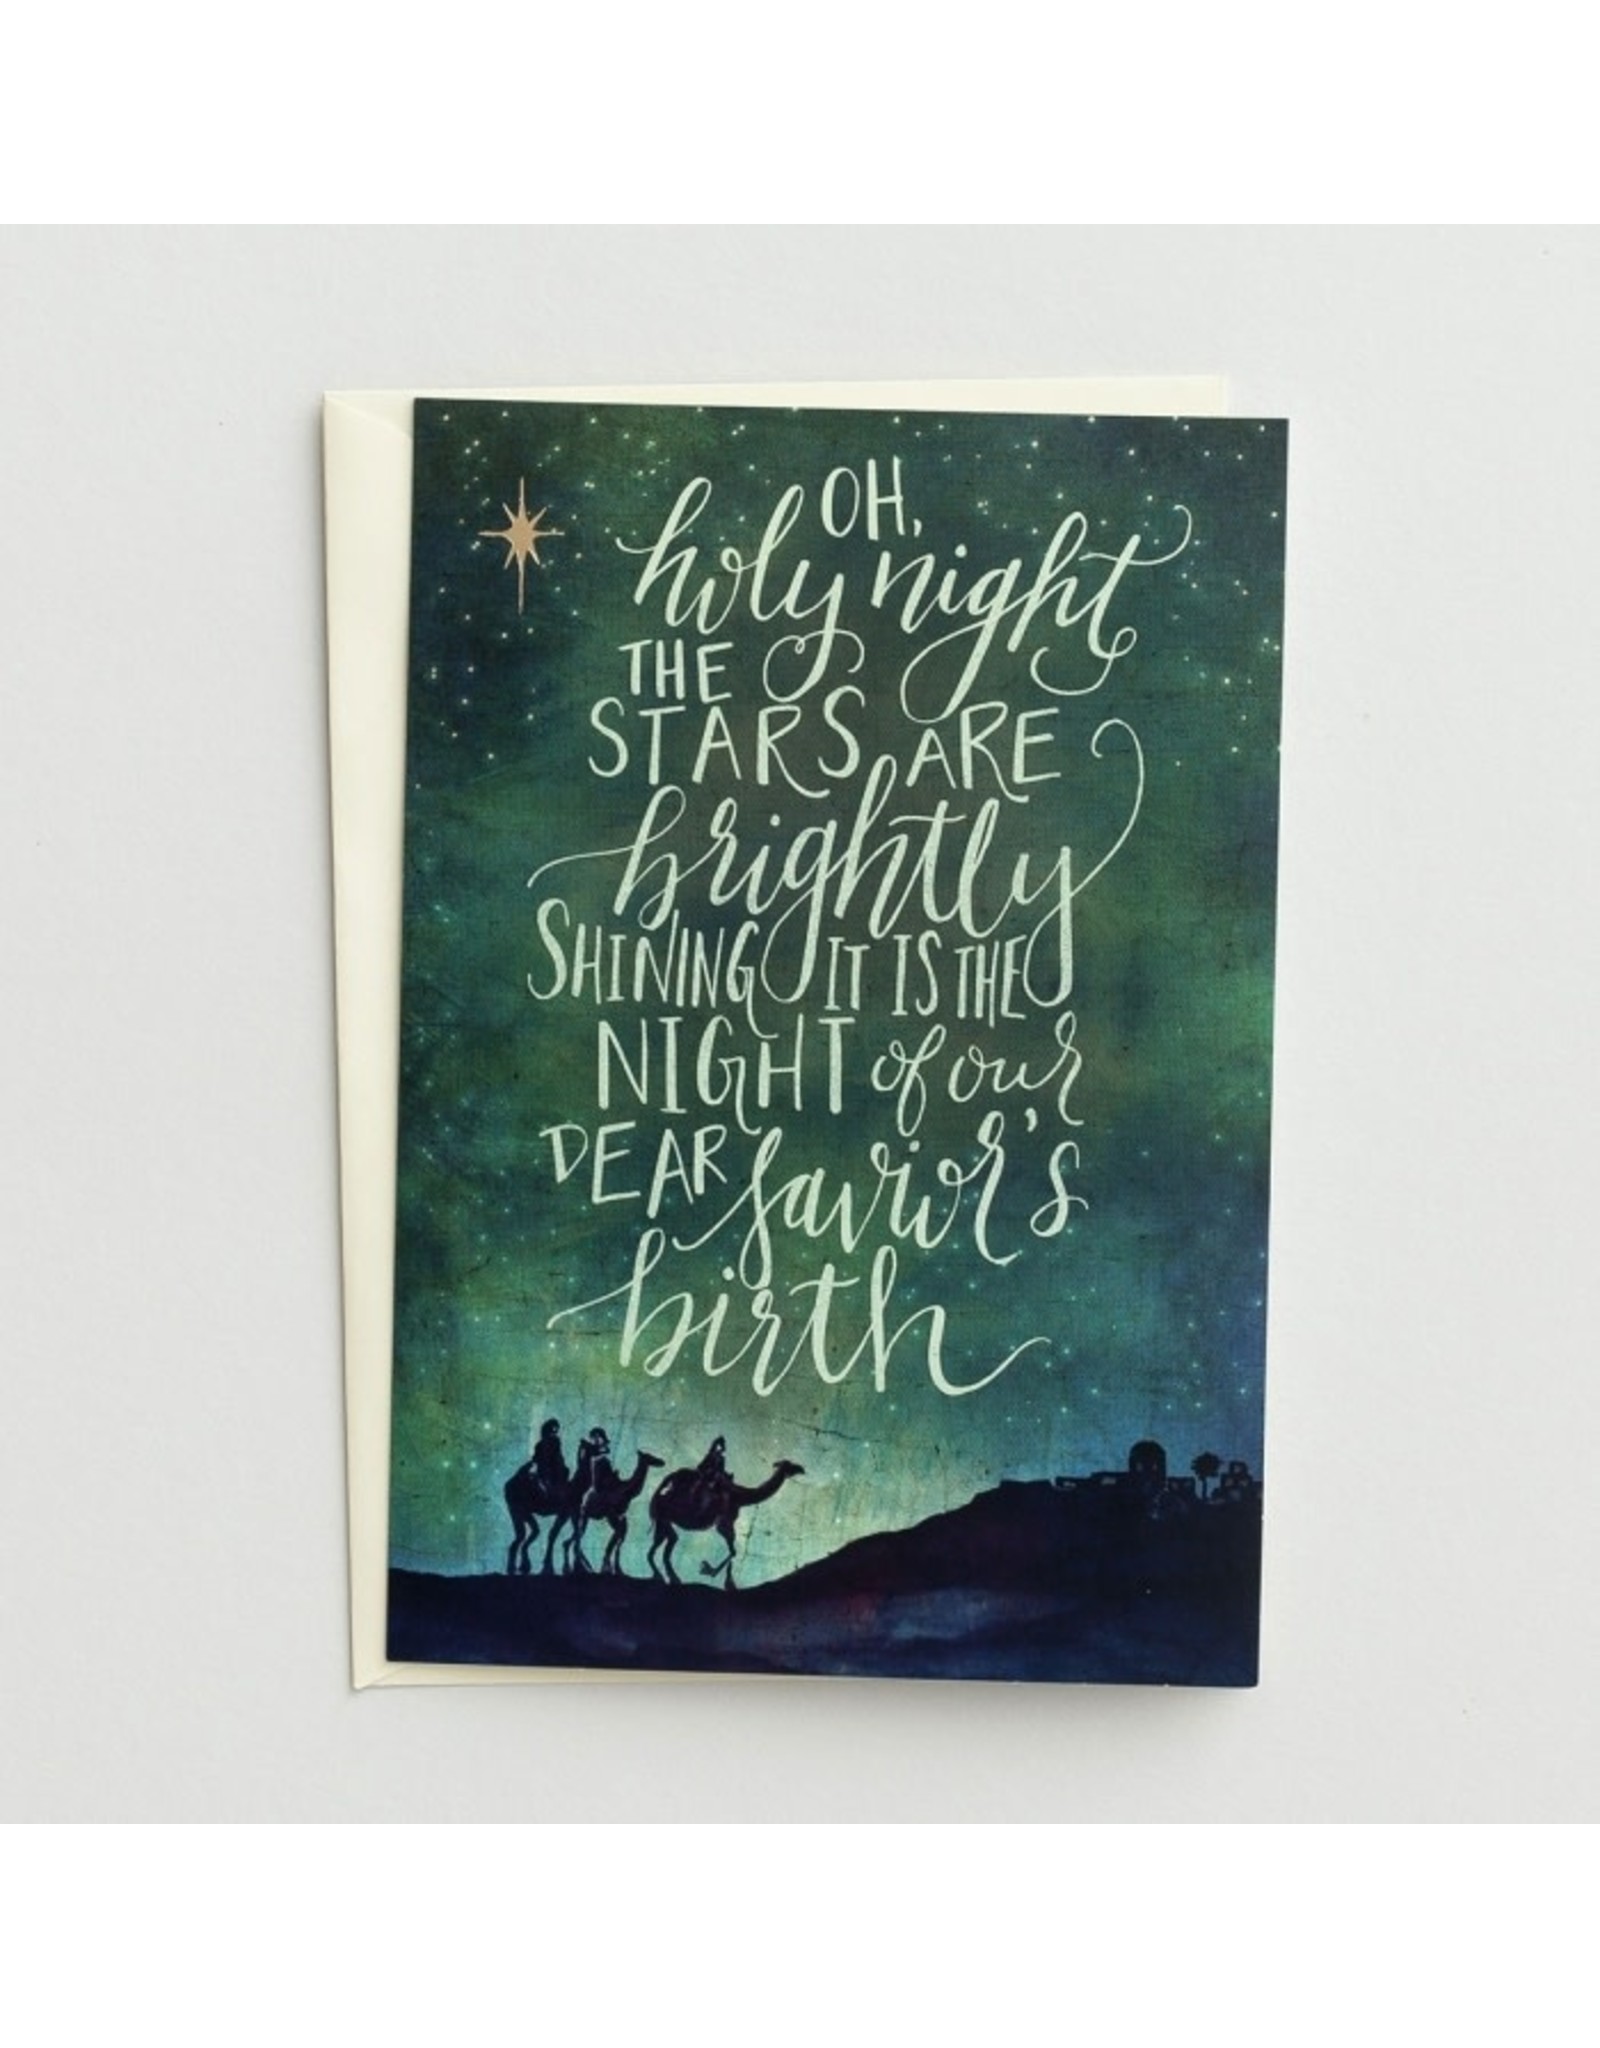 Dayspring Boxed Set of 18 Christmas Cards - Oh, Holy Night, KJV